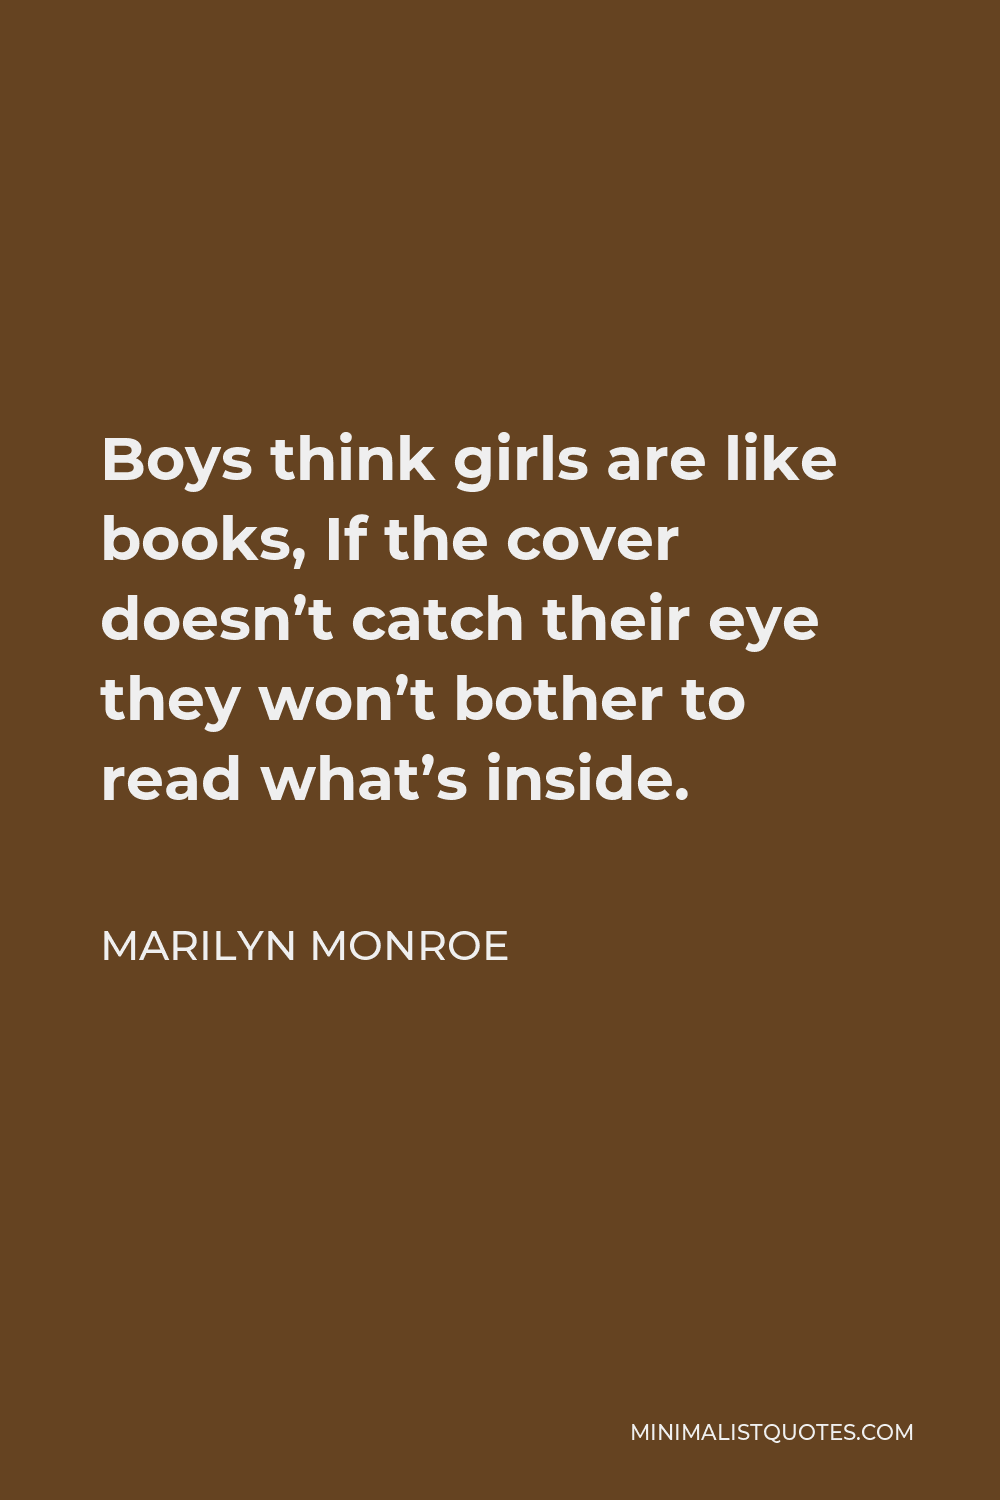 Marilyn Monroe Quote - Boys think girls are like books, If the cover doesn’t catch their eye they won’t bother to read what’s inside.